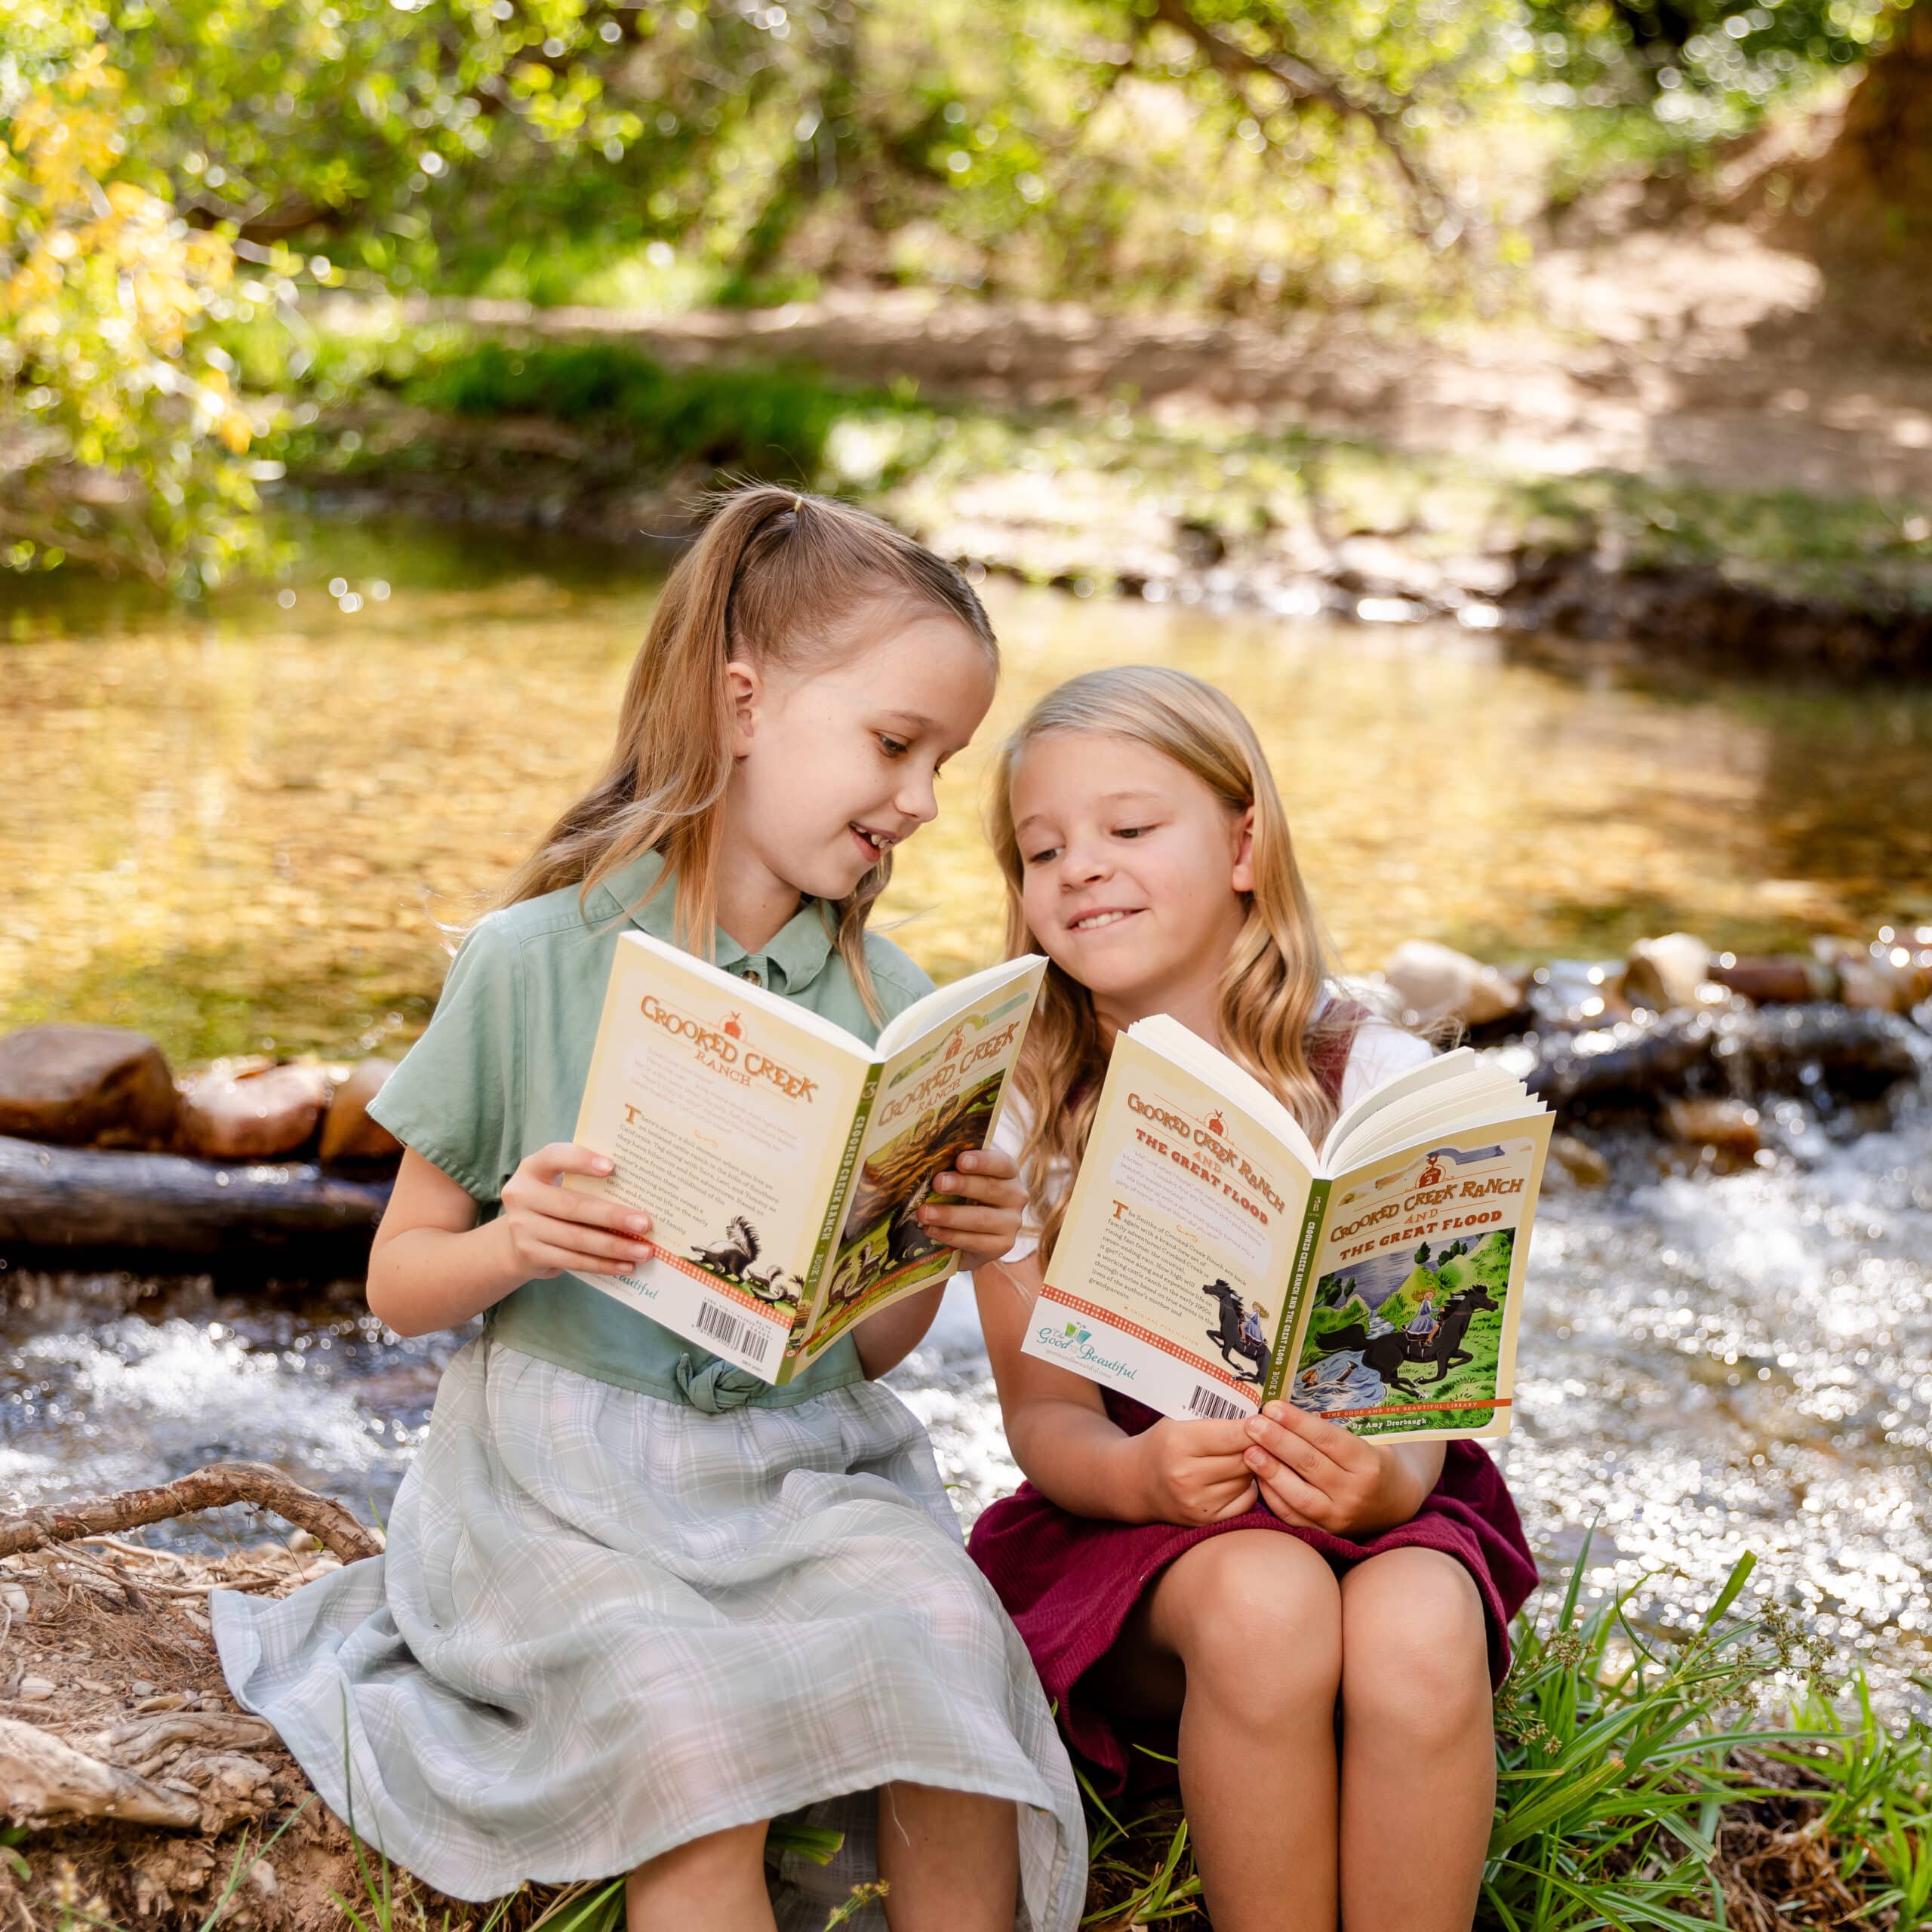 Photograph of Two Girls Reading Crooked Creek Ranch and the Great Flood Book